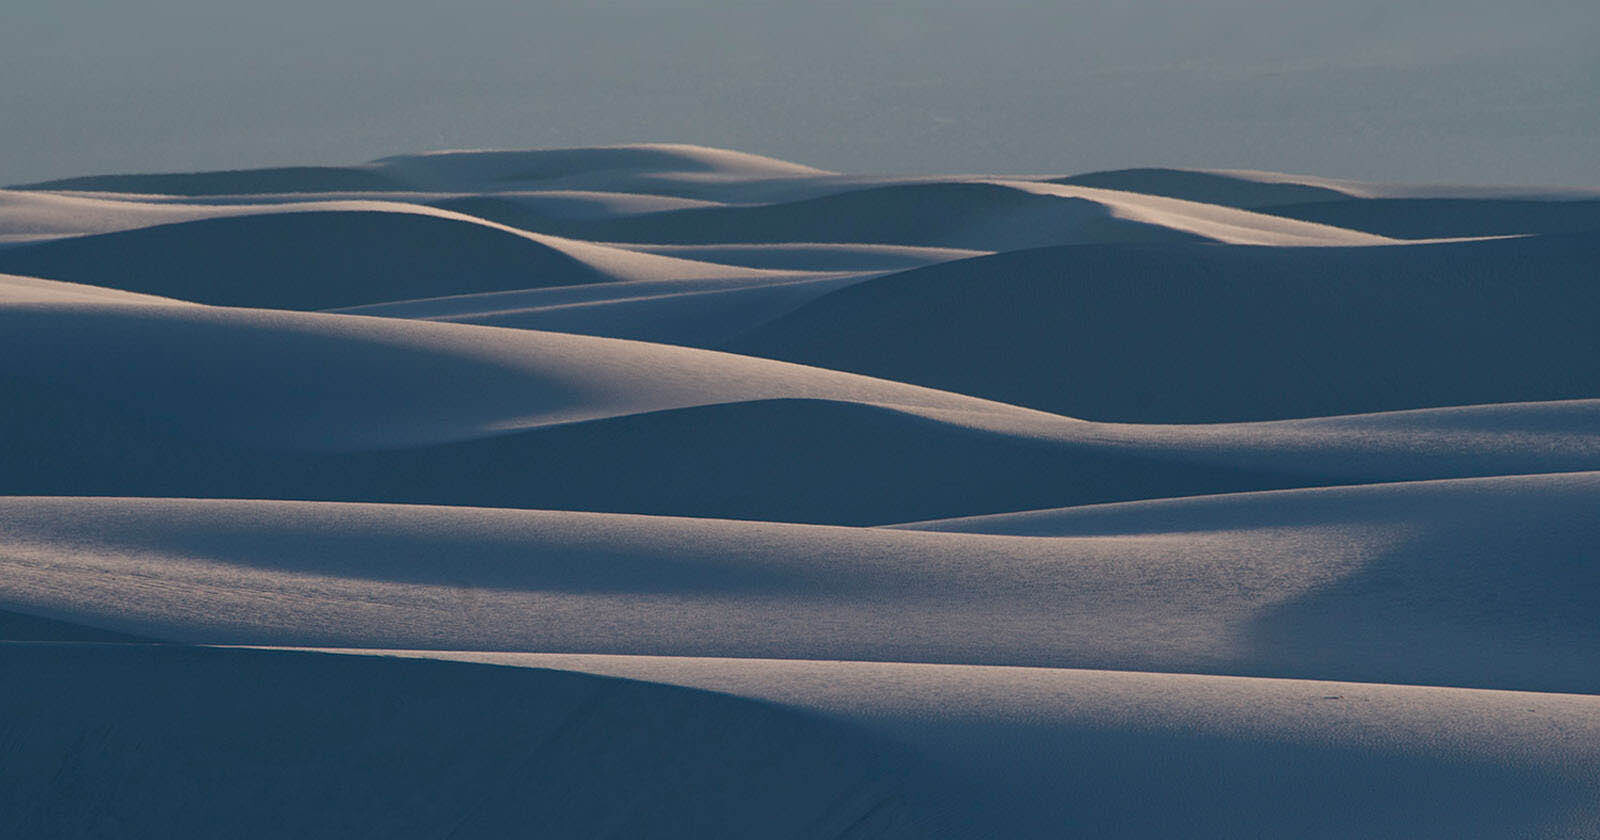 Chasing the Light at White Sands National Park